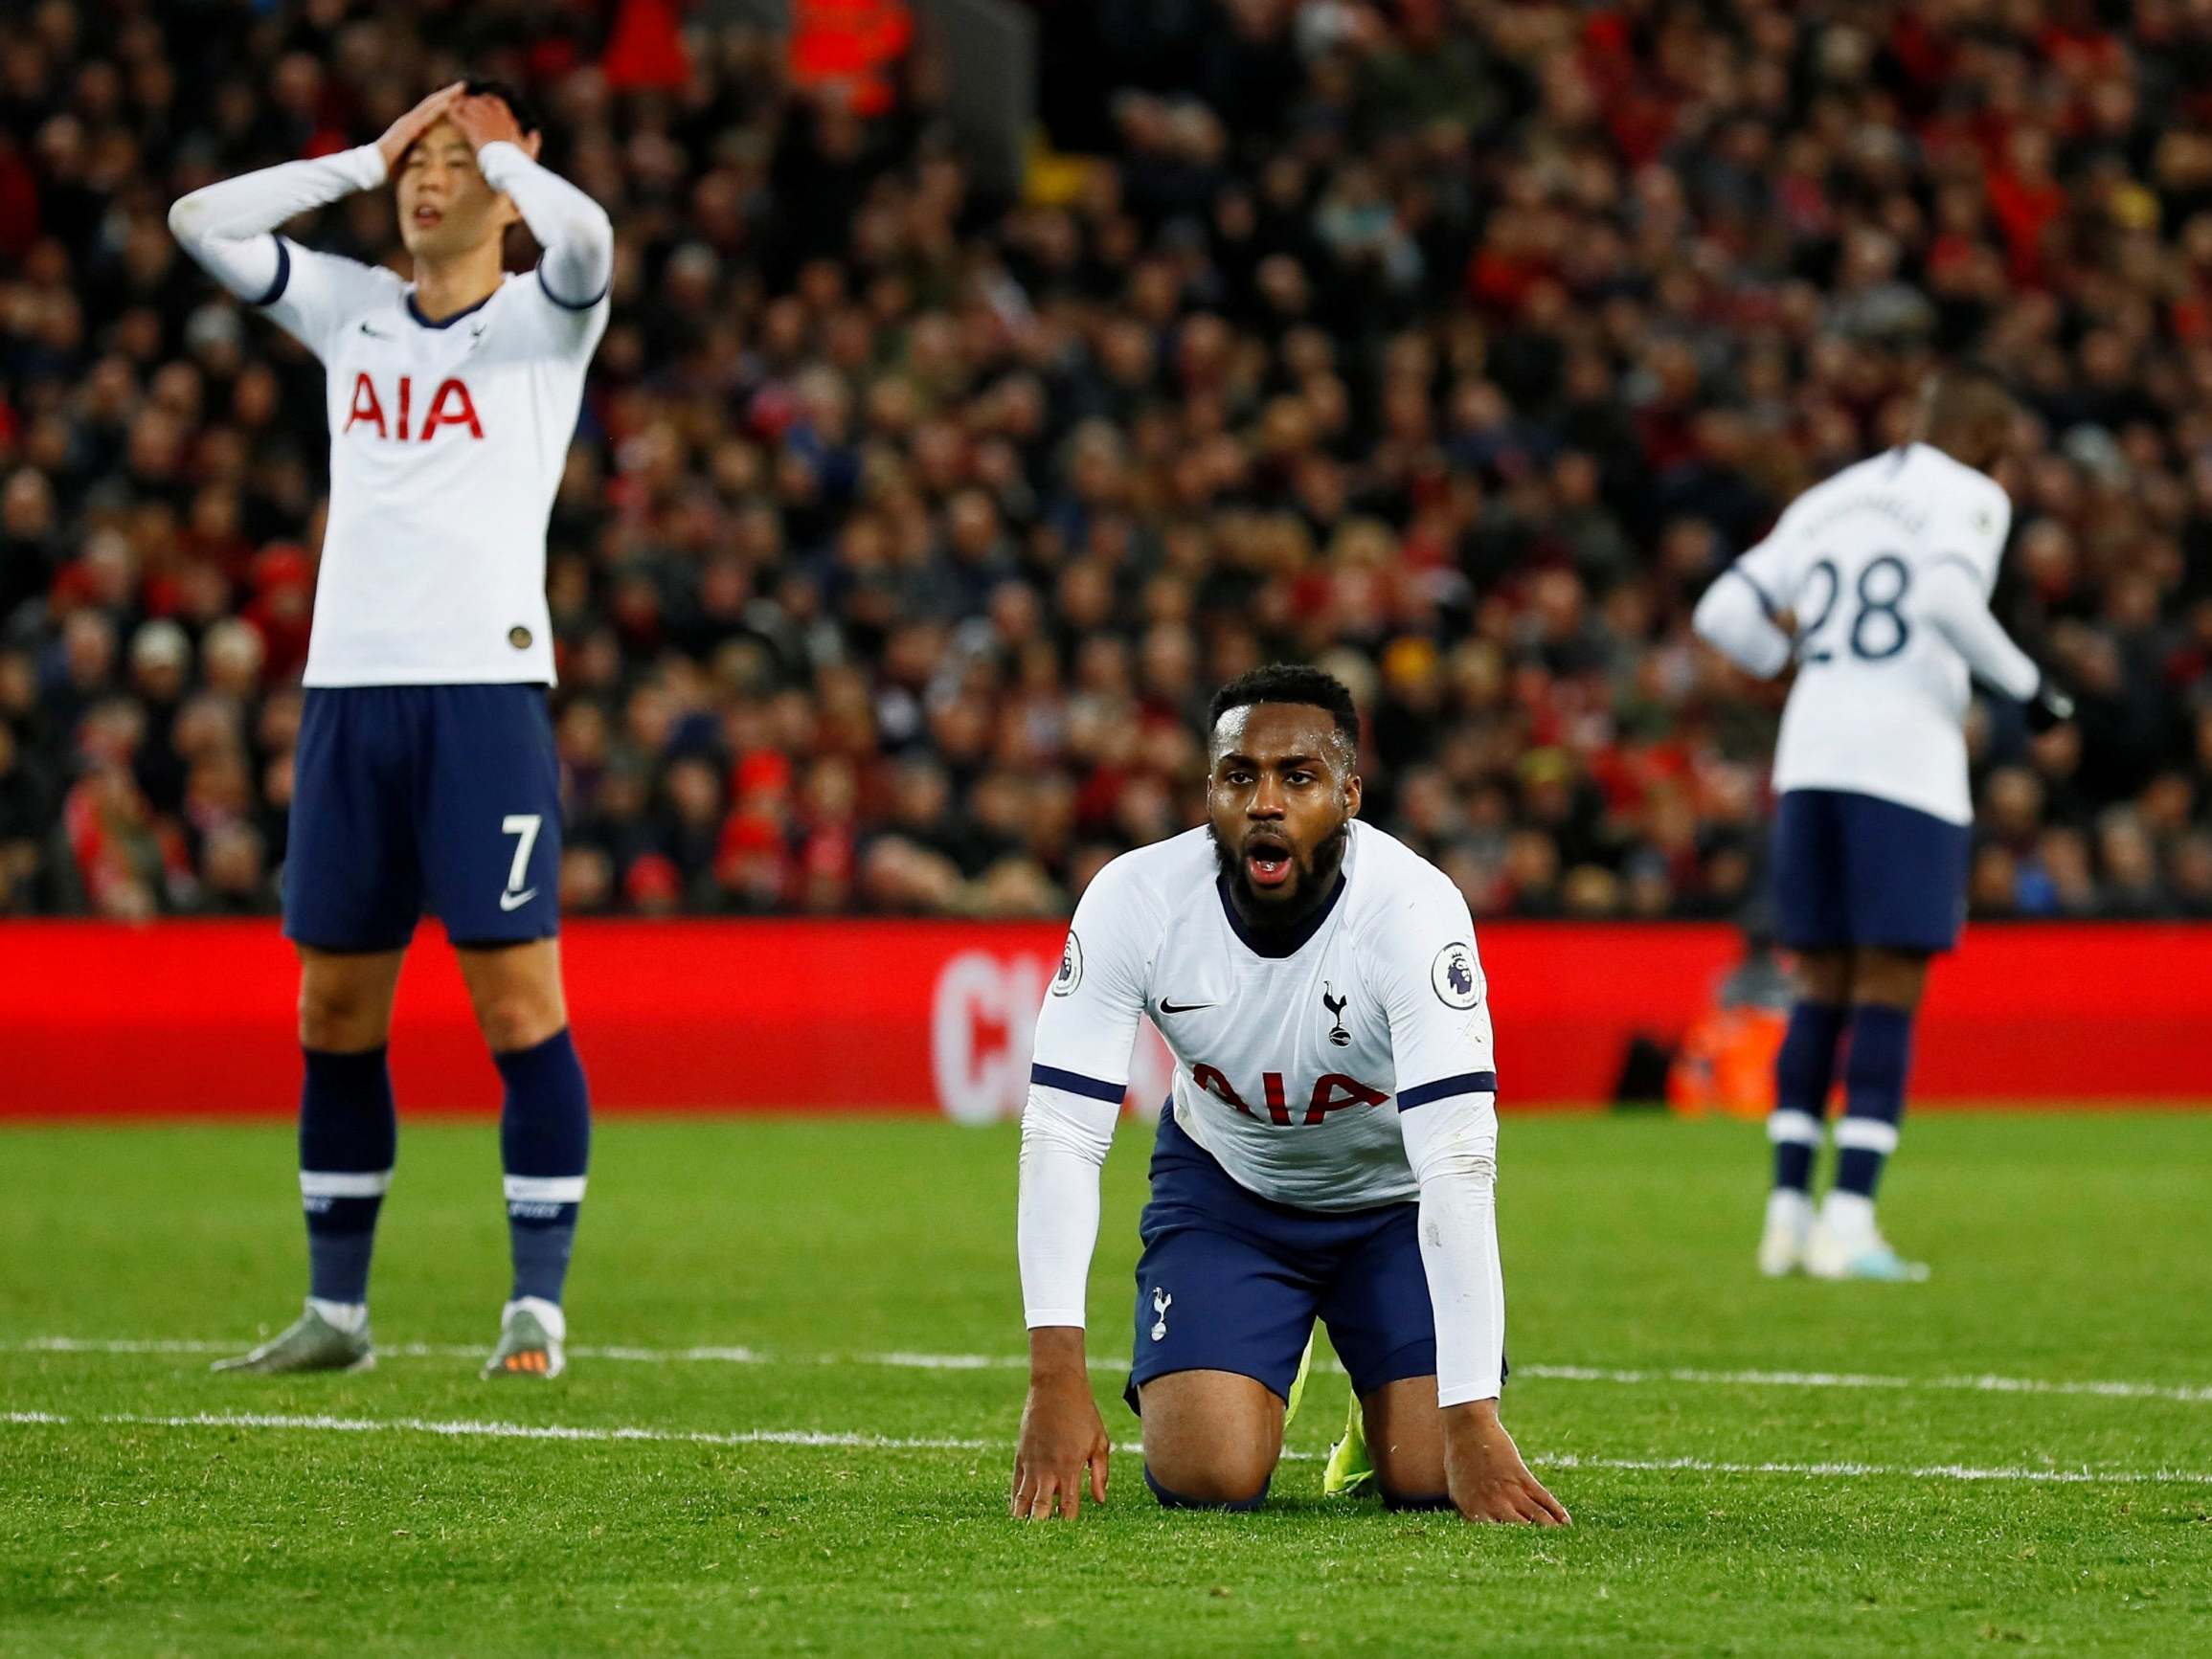 Tottenham Hotspur's Danny Rose reacts after a missed chance